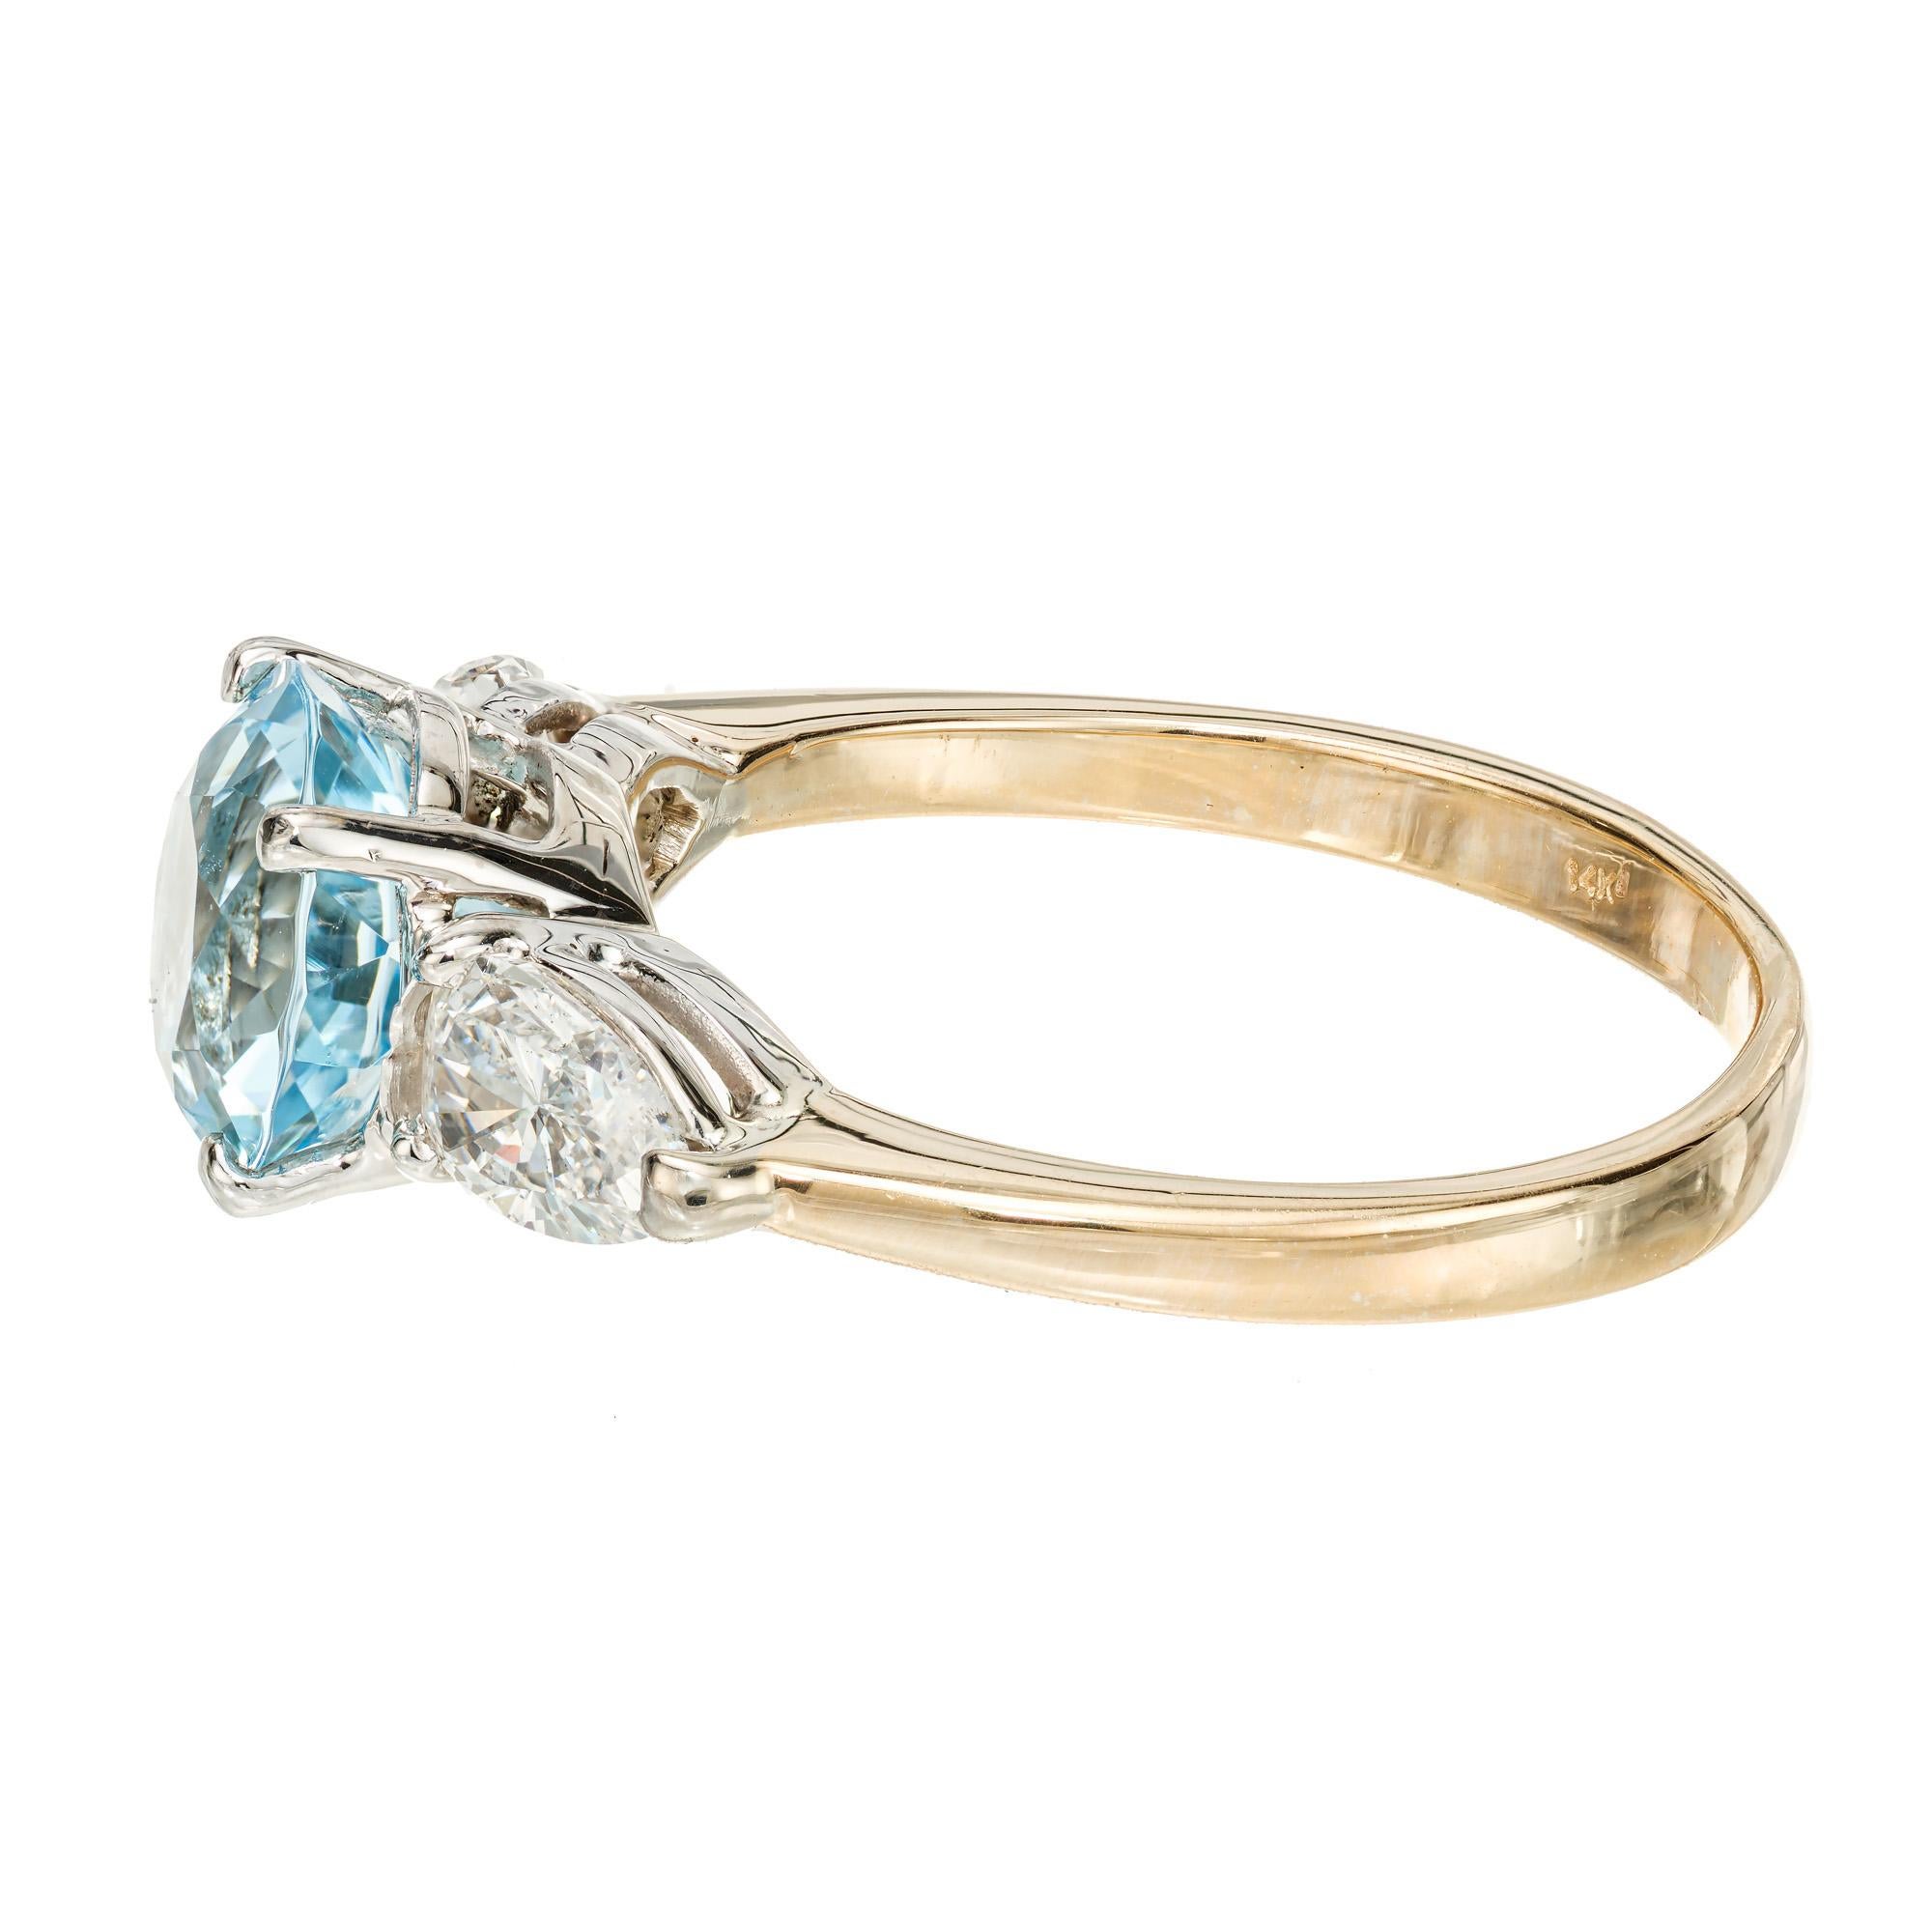 Peter Suchy 1.65 Carat Aqua Diamond Gold Three-Stone Engagement Ring In New Condition For Sale In Stamford, CT